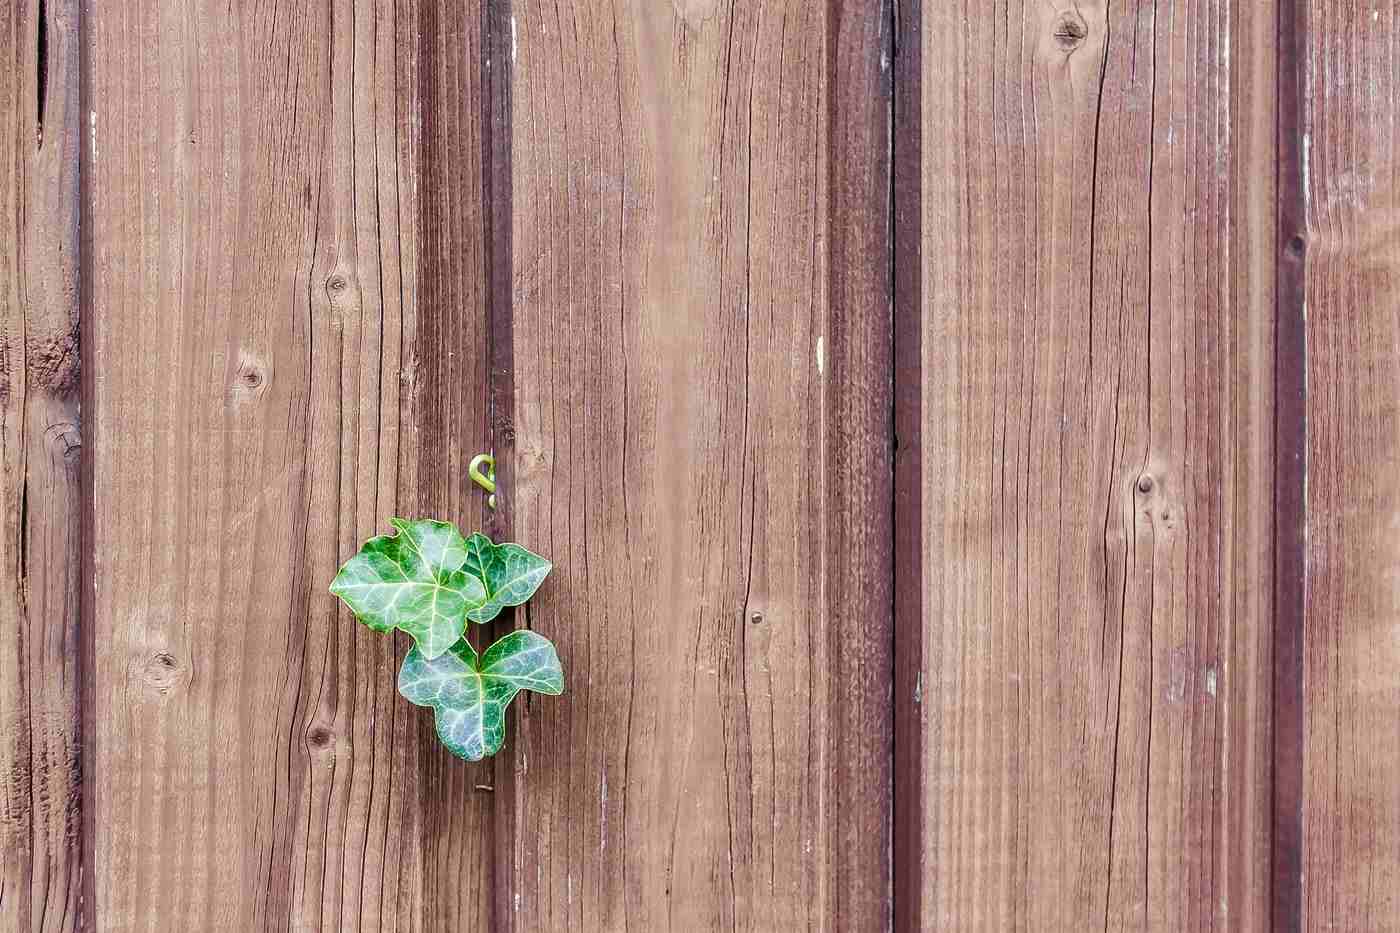 cedar fence with ivy - how to protect your wood fence from rotting